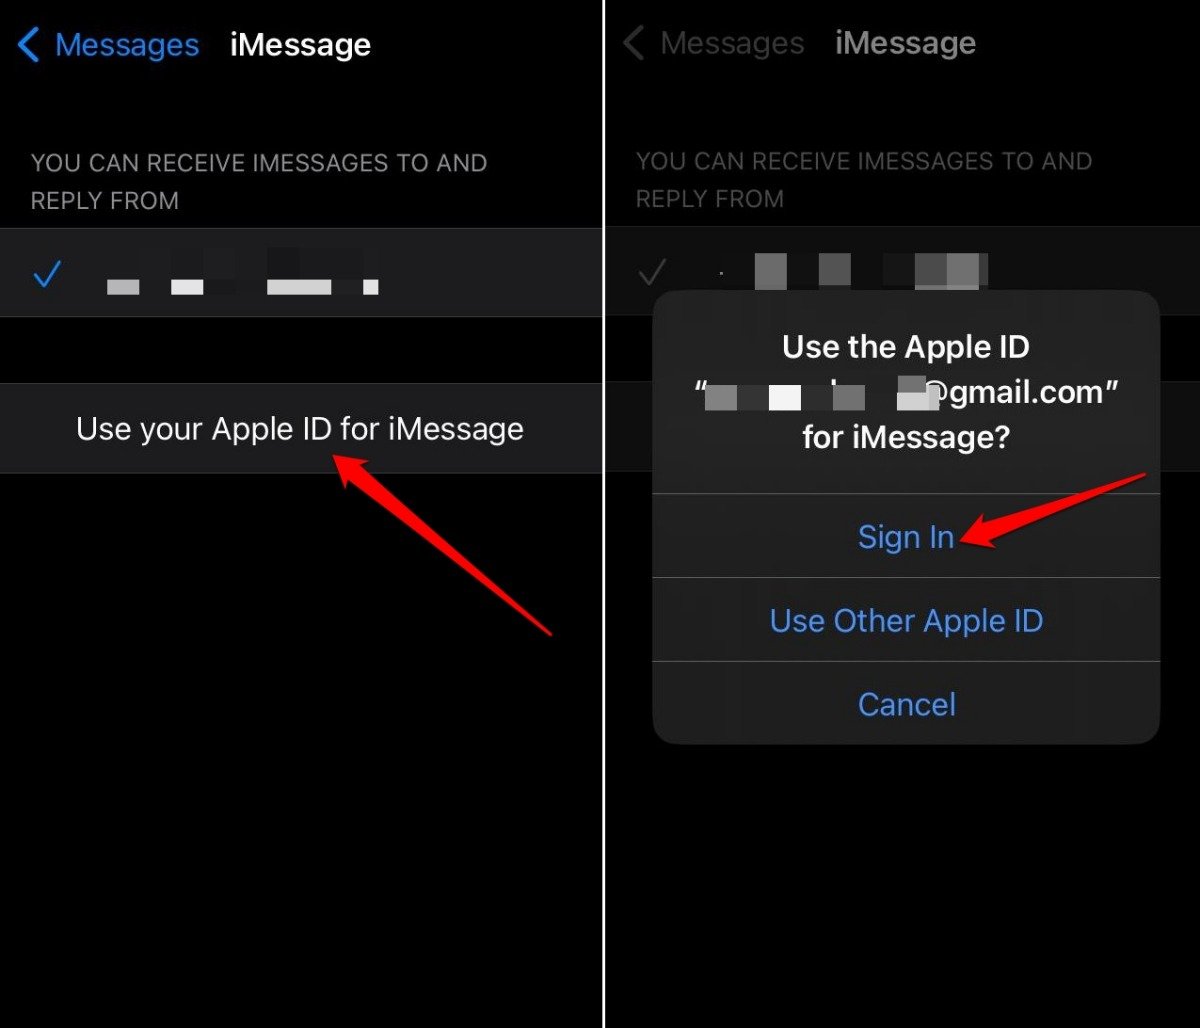 sign in with Apple ID to access iMessage